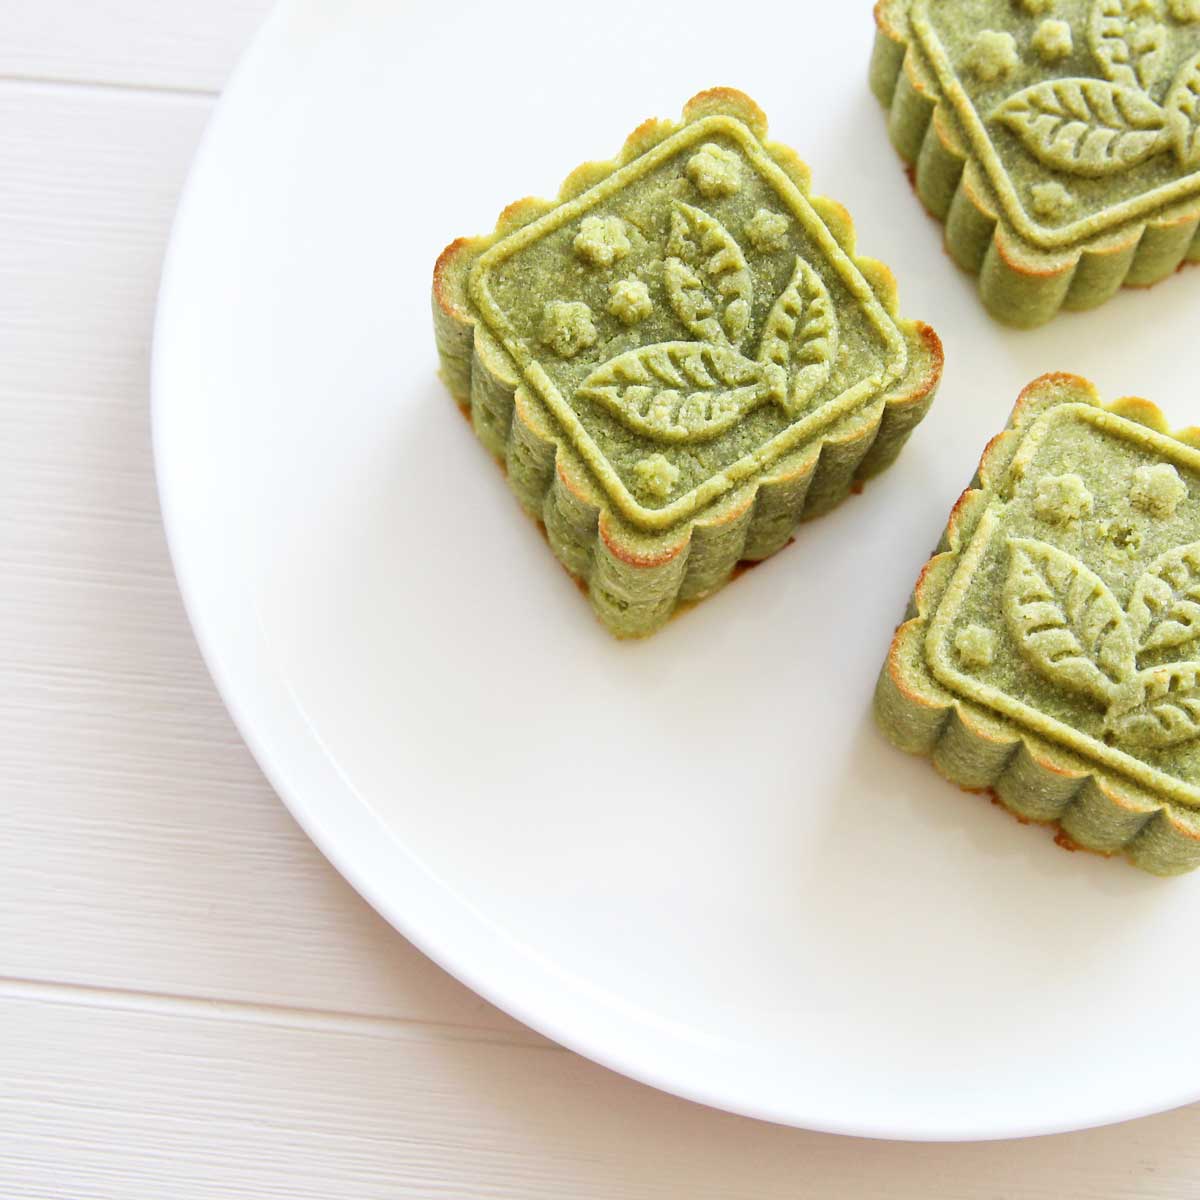 Easy Vegan Matcha Mooncakes Recipe with Almond Paste Filling (Gluten-Free) - Walnut Butter Mooncakes